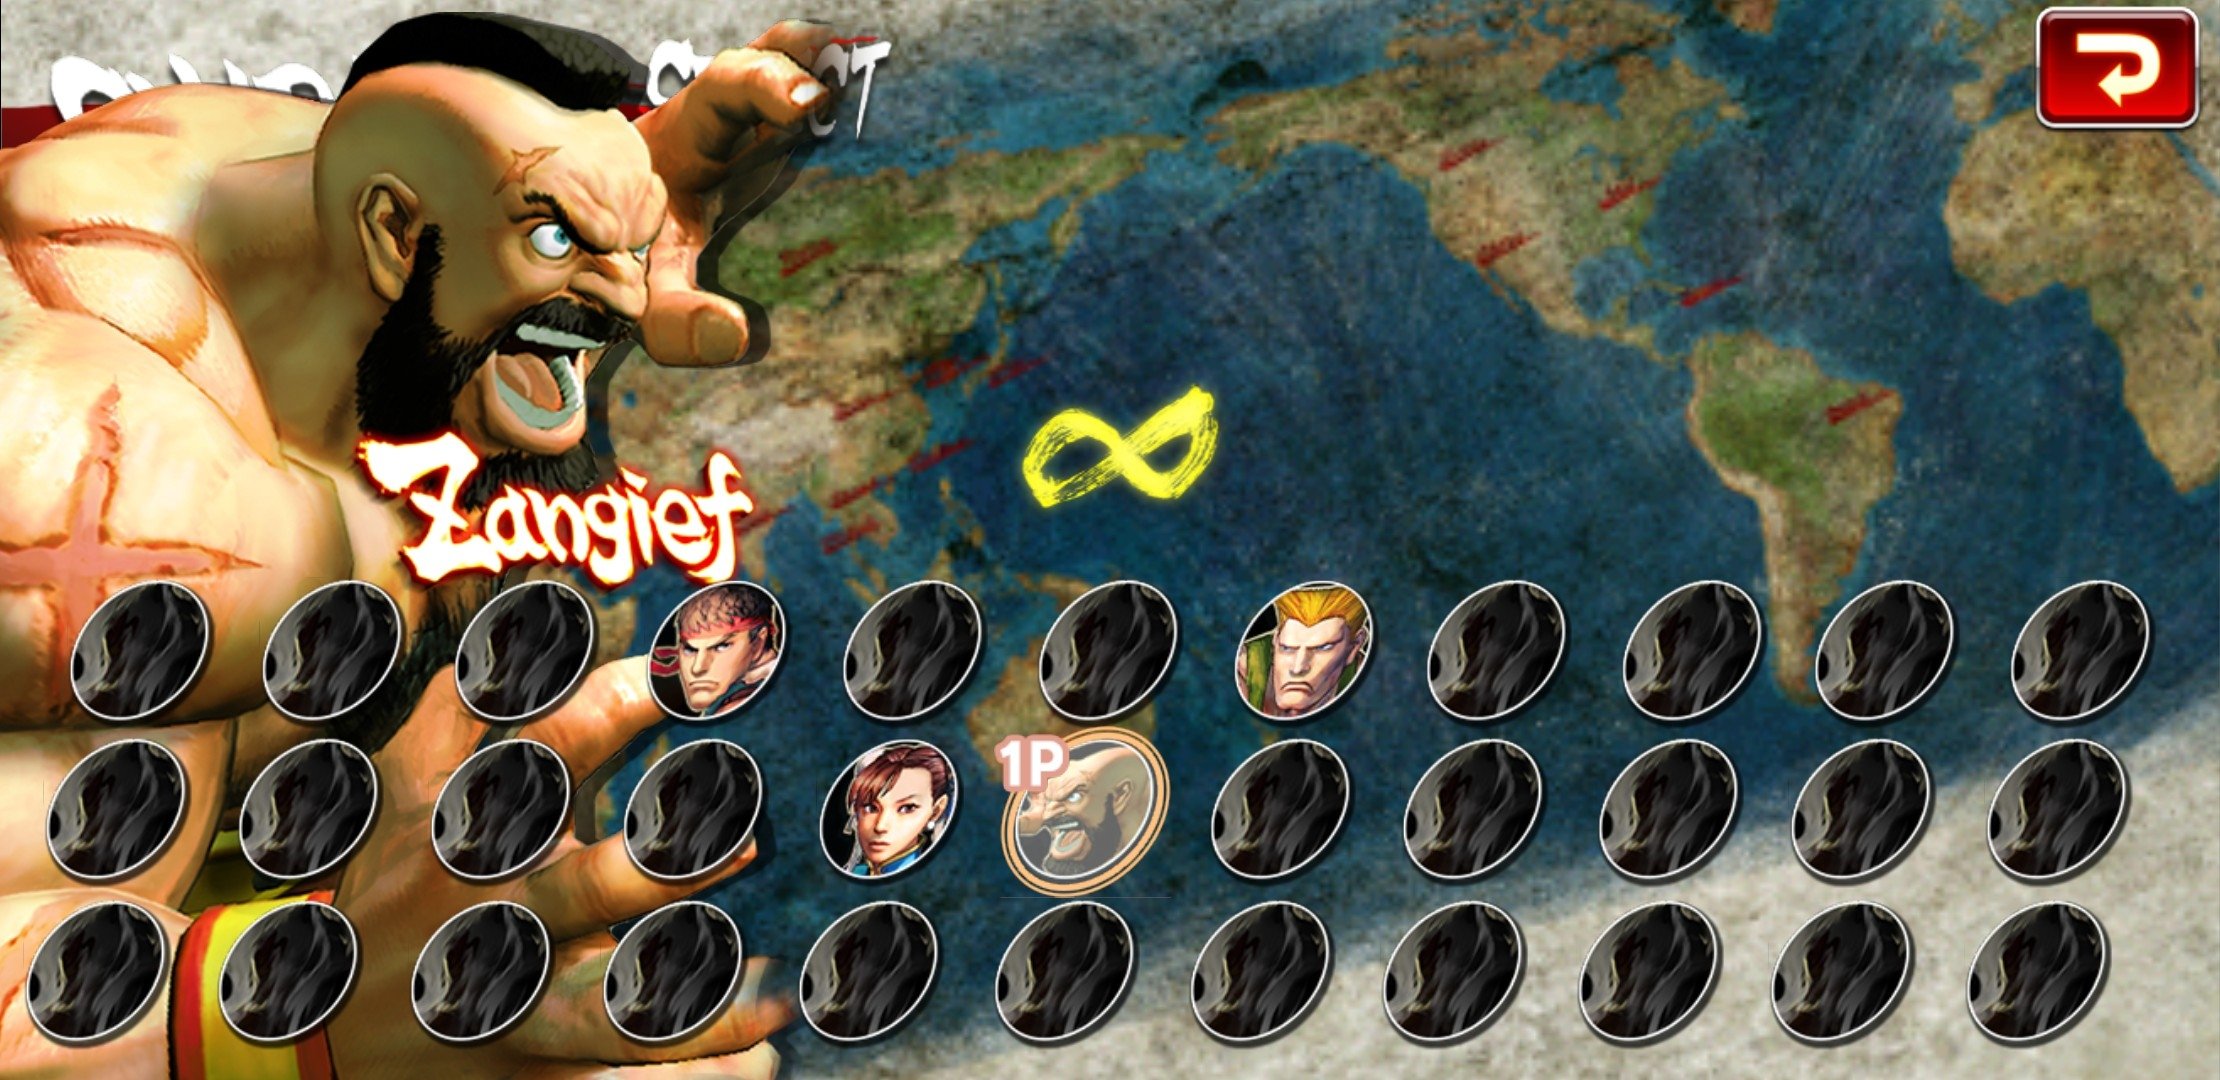 Street Fighter IV Champion Edition APK Download for Android Free